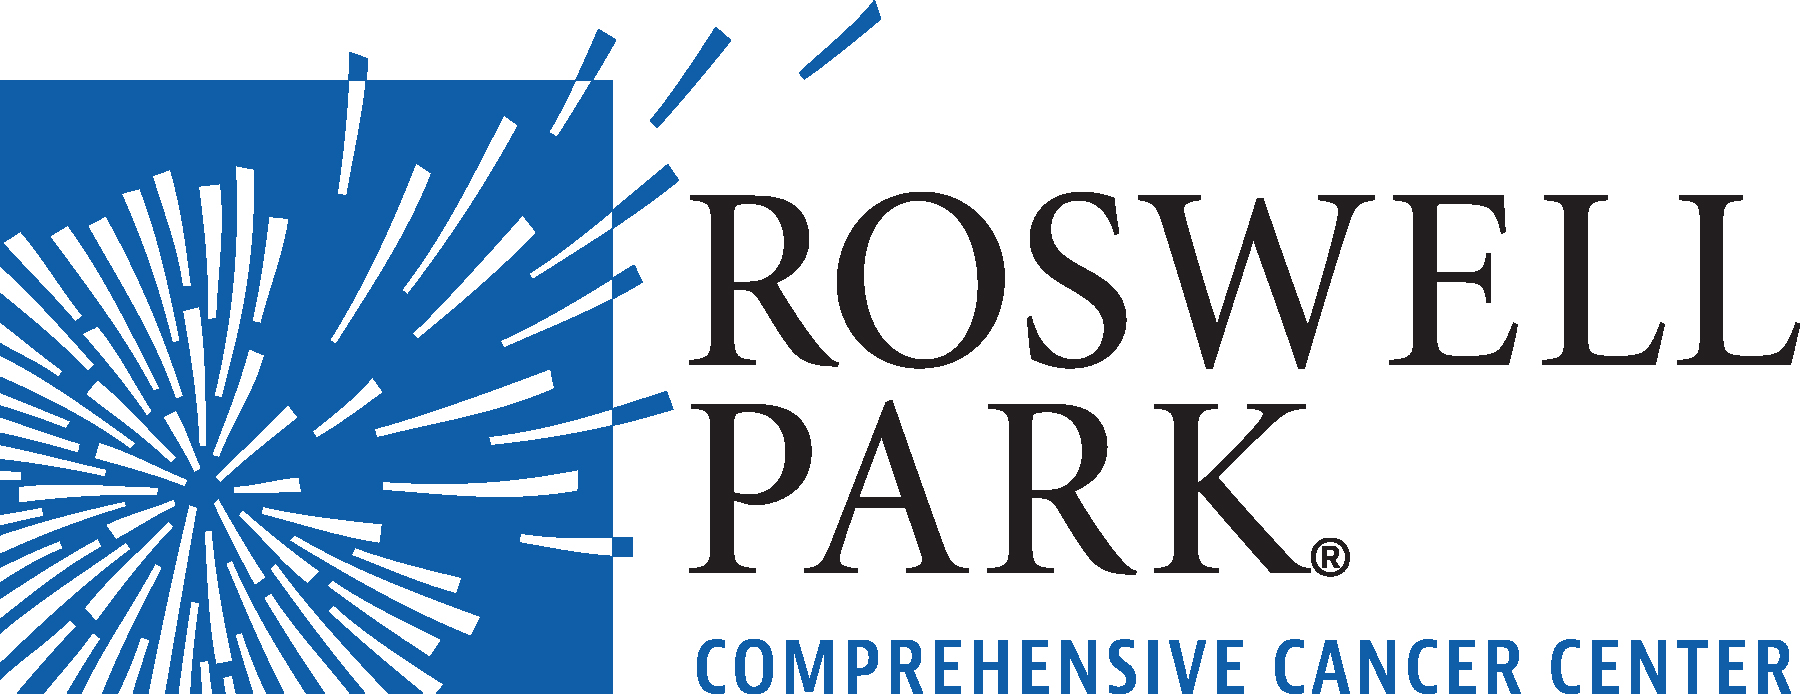 Roswell Park Appoints 7 Nursing Leaders in New or Expanded Roles